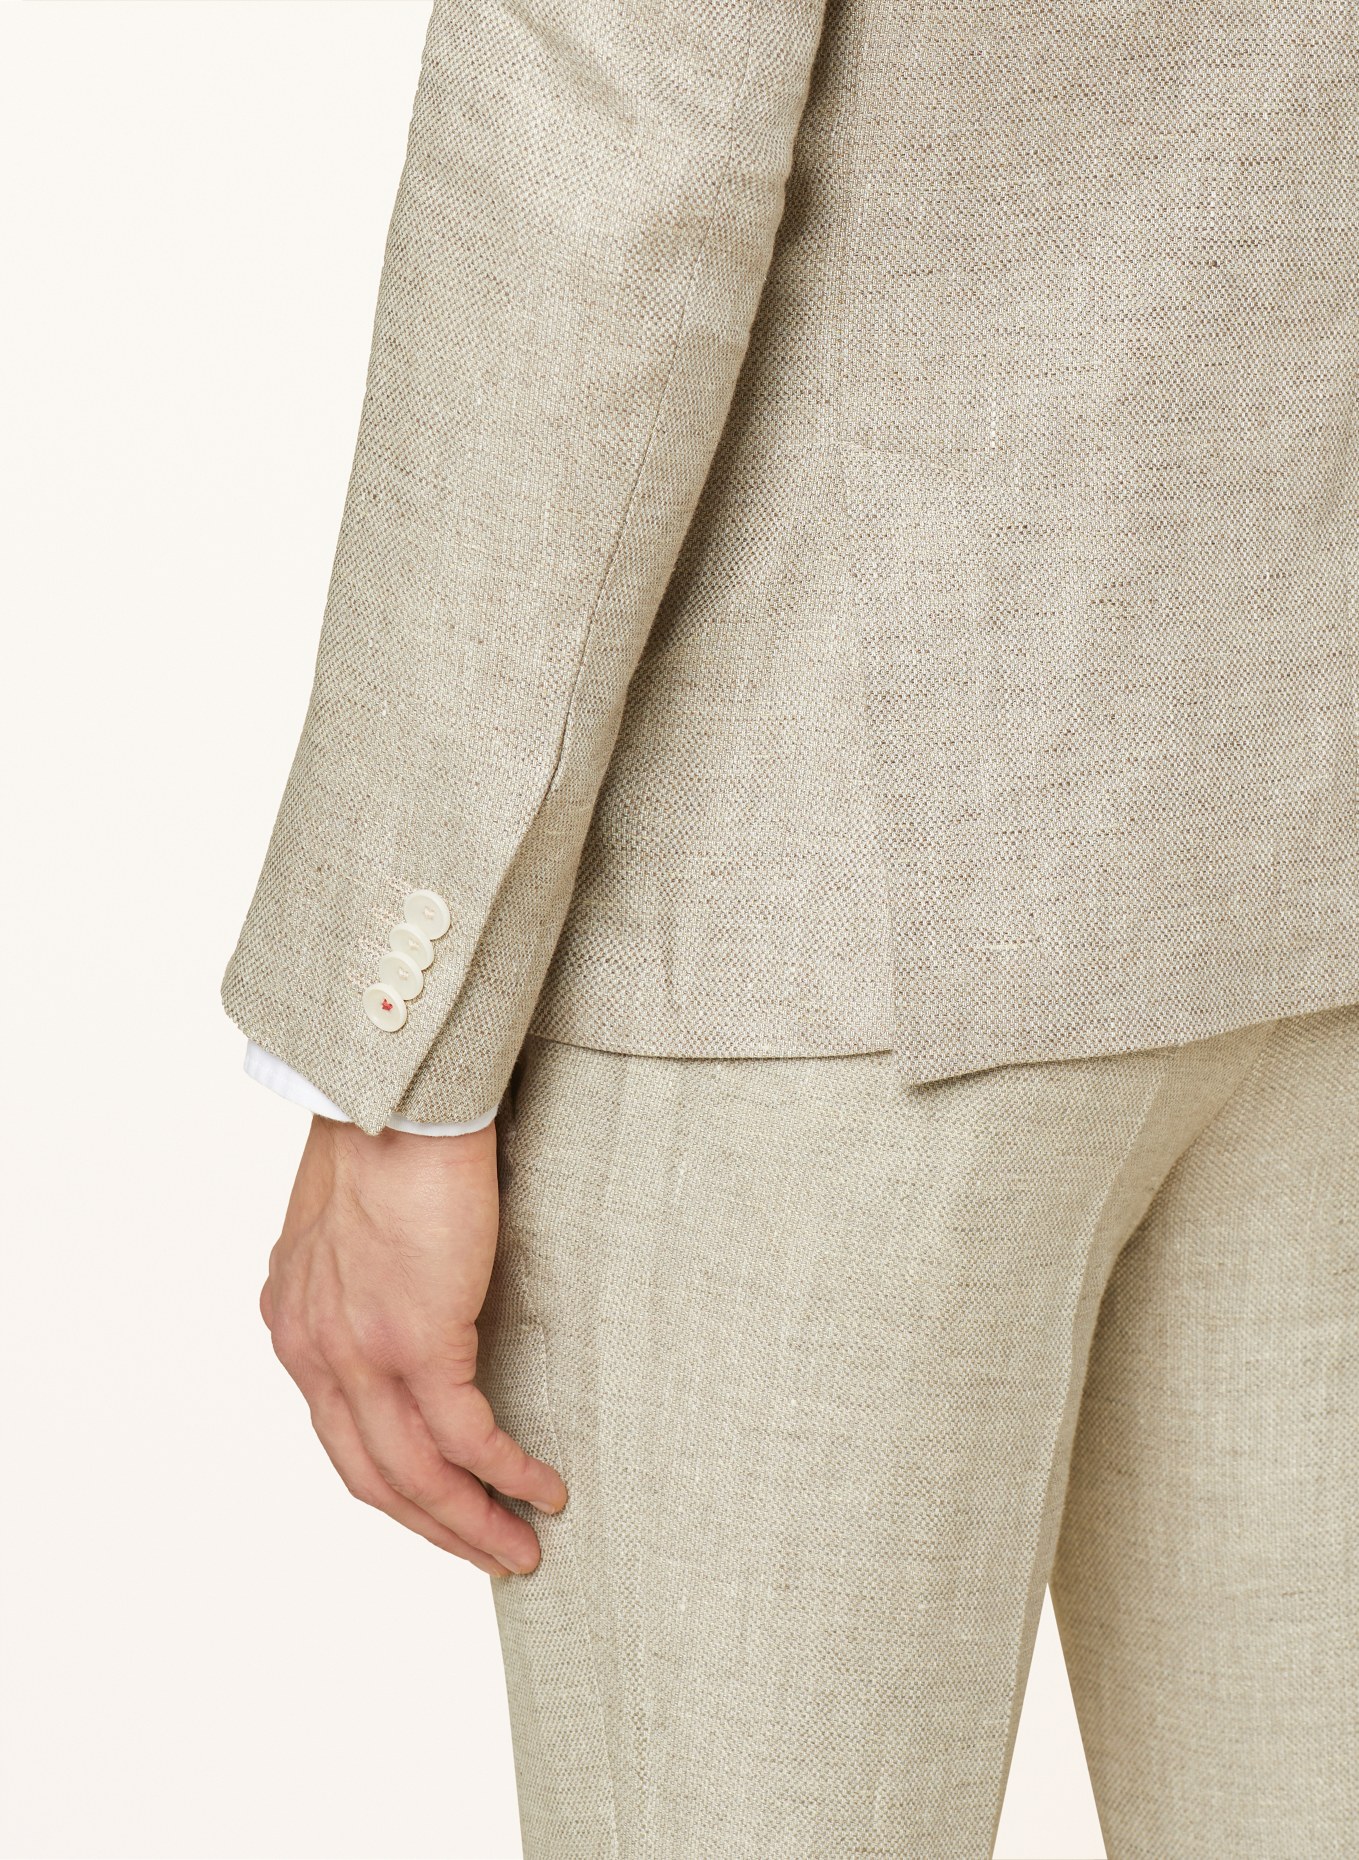 CG - CLUB of GENTS Suit jacket SG PETERSON slim fit with linen, Color: 21 HELLBEIGE (Image 7)